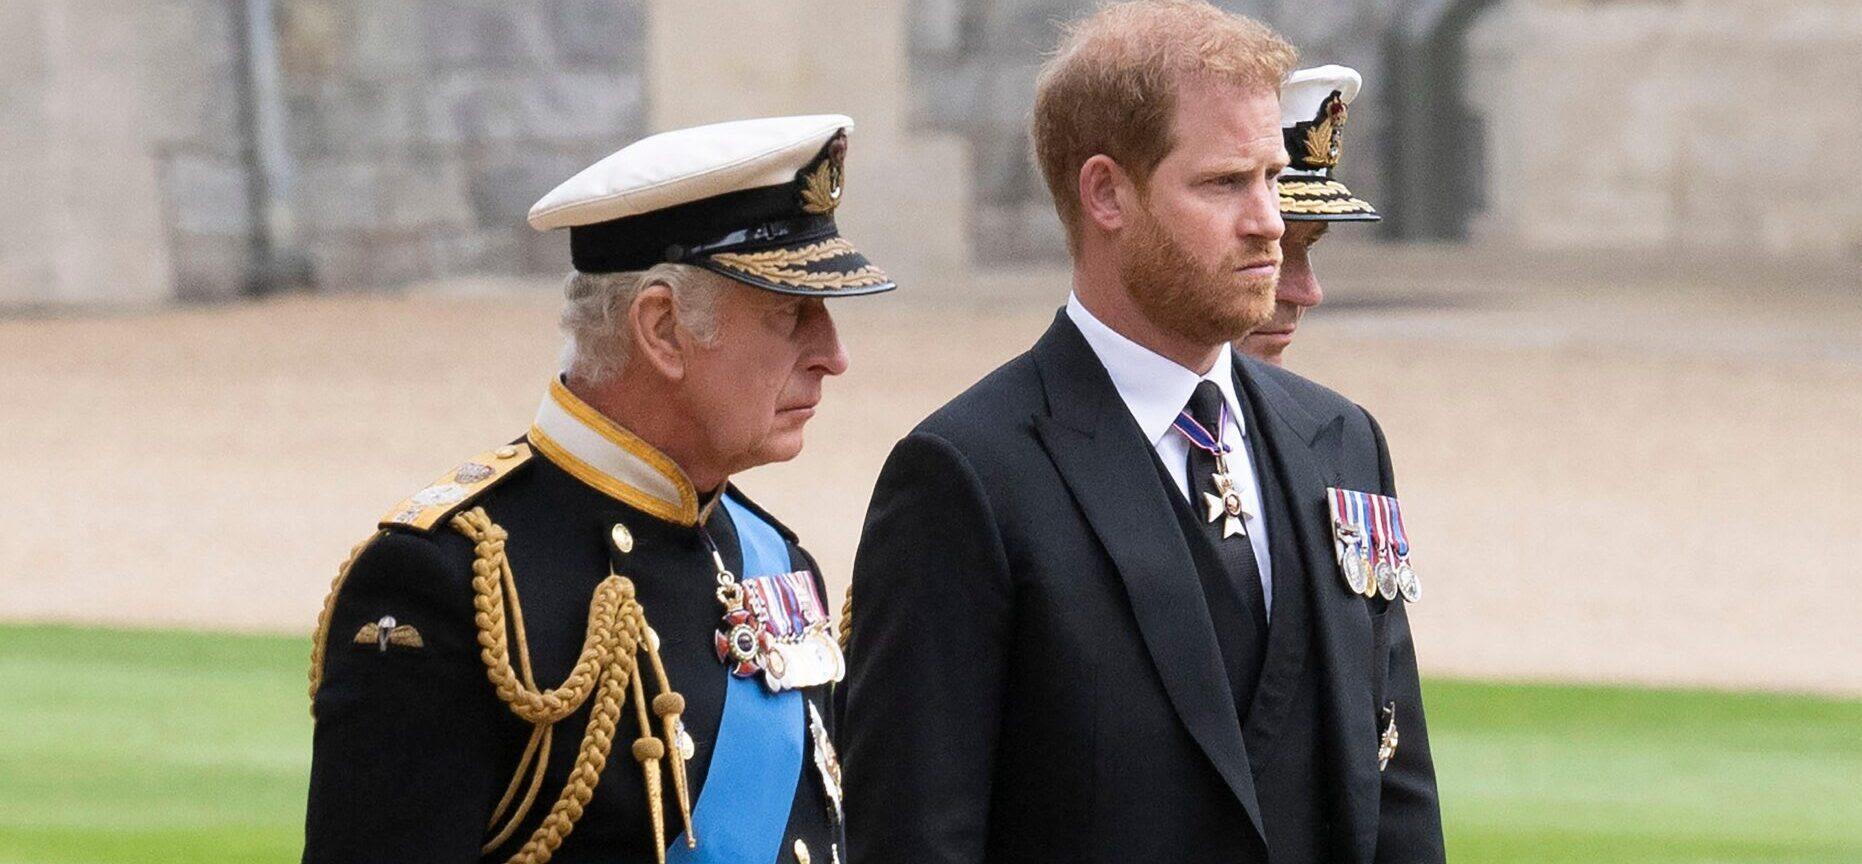 King Charles Reportedly Gives Prince Harry's Military Role To Prince William